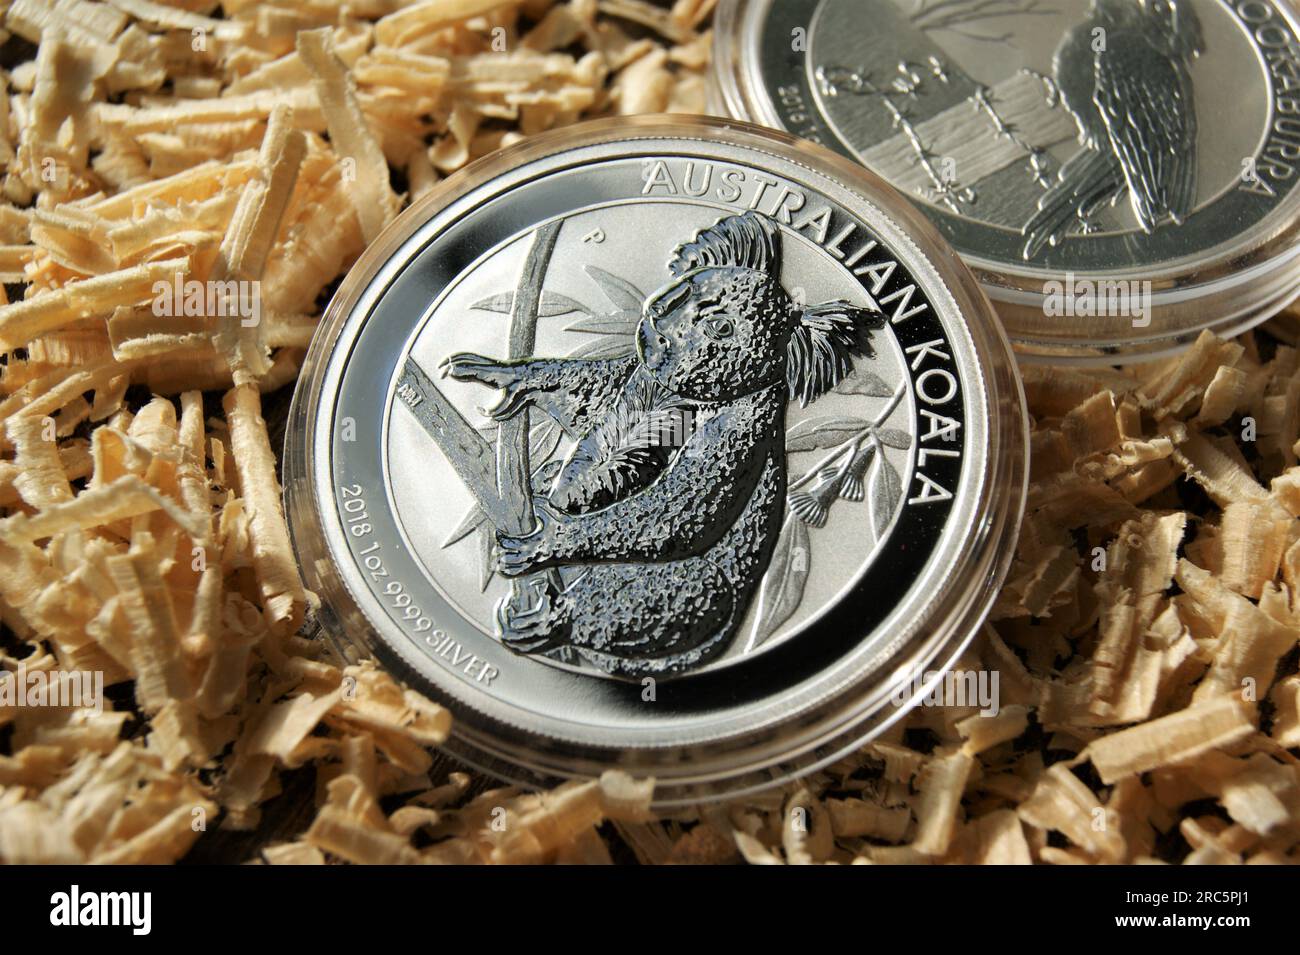 Coins collection numismatics. 1Dollar Australian koala. Pure silver investment coin in capsule. Stock Photo